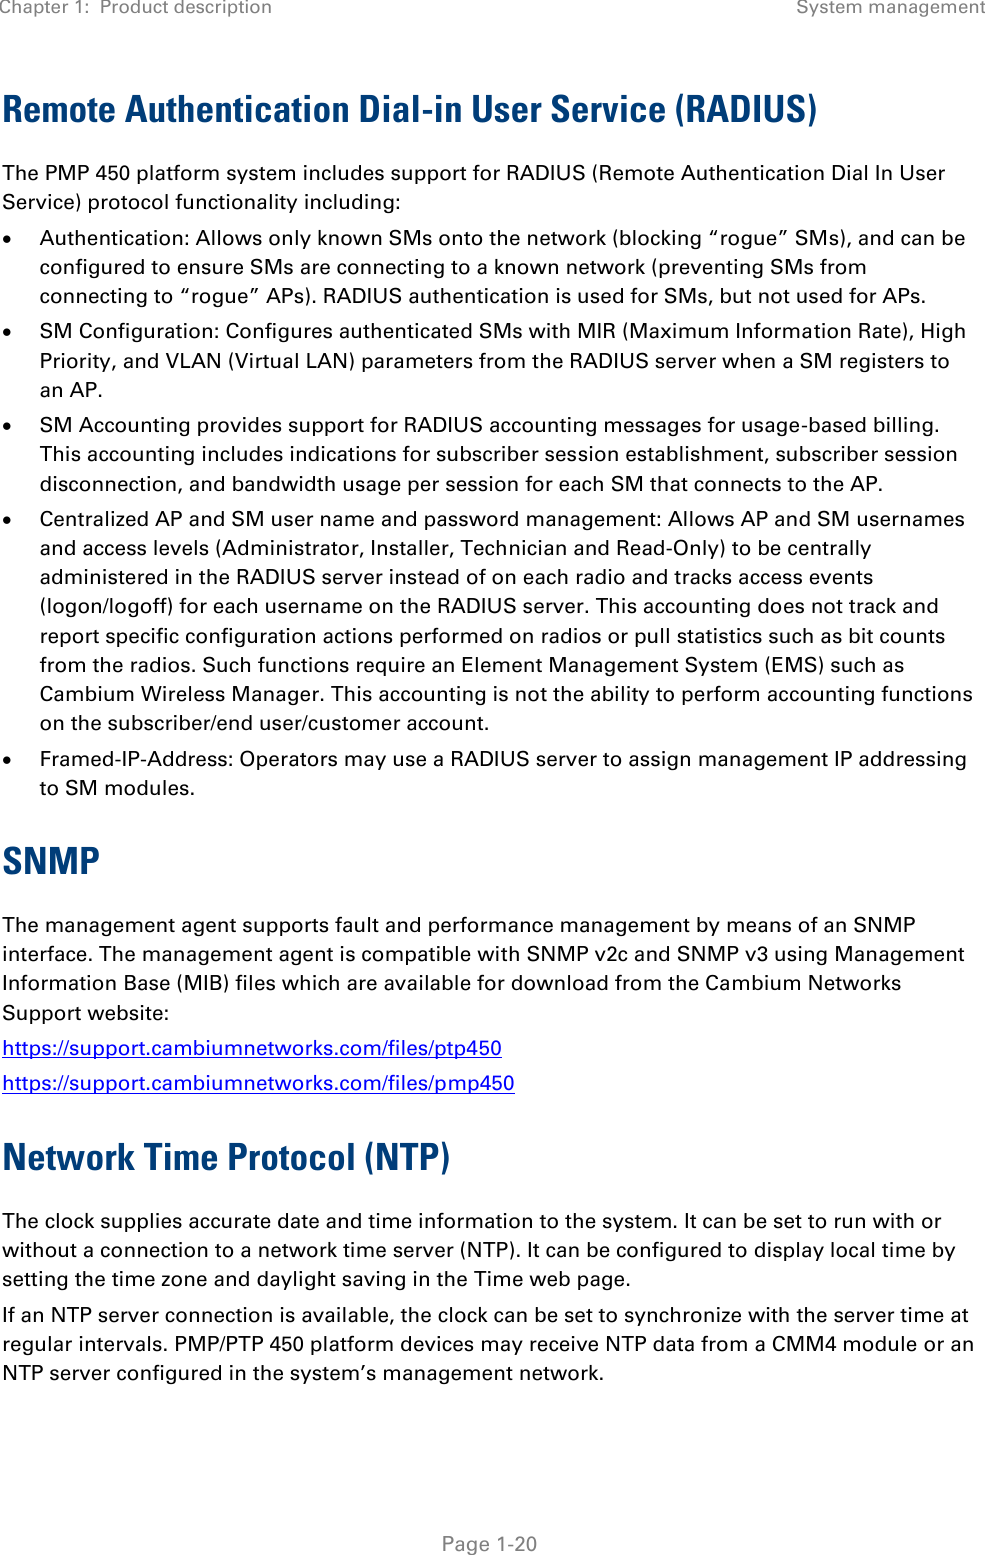 Chapter 1:  Product description System management   Page 1-20 Remote Authentication Dial-in User Service (RADIUS) The PMP 450 platform system includes support for RADIUS (Remote Authentication Dial In User Service) protocol functionality including:  Authentication: Allows only known SMs onto the network (blocking “rogue” SMs), and can be configured to ensure SMs are connecting to a known network (preventing SMs from connecting to “rogue” APs). RADIUS authentication is used for SMs, but not used for APs.  SM Configuration: Configures authenticated SMs with MIR (Maximum Information Rate), High Priority, and VLAN (Virtual LAN) parameters from the RADIUS server when a SM registers to an AP.  SM Accounting provides support for RADIUS accounting messages for usage-based billing. This accounting includes indications for subscriber session establishment, subscriber session disconnection, and bandwidth usage per session for each SM that connects to the AP.  Centralized AP and SM user name and password management: Allows AP and SM usernames and access levels (Administrator, Installer, Technician and Read-Only) to be centrally administered in the RADIUS server instead of on each radio and tracks access events (logon/logoff) for each username on the RADIUS server. This accounting does not track and report specific configuration actions performed on radios or pull statistics such as bit counts from the radios. Such functions require an Element Management System (EMS) such as Cambium Wireless Manager. This accounting is not the ability to perform accounting functions on the subscriber/end user/customer account.  Framed-IP-Address: Operators may use a RADIUS server to assign management IP addressing to SM modules. SNMP The management agent supports fault and performance management by means of an SNMP interface. The management agent is compatible with SNMP v2c and SNMP v3 using Management Information Base (MIB) files which are available for download from the Cambium Networks Support website: https://support.cambiumnetworks.com/files/ptp450 https://support.cambiumnetworks.com/files/pmp450 Network Time Protocol (NTP) The clock supplies accurate date and time information to the system. It can be set to run with or without a connection to a network time server (NTP). It can be configured to display local time by setting the time zone and daylight saving in the Time web page. If an NTP server connection is available, the clock can be set to synchronize with the server time at regular intervals. PMP/PTP 450 platform devices may receive NTP data from a CMM4 module or an NTP server configured in the system’s management network. 